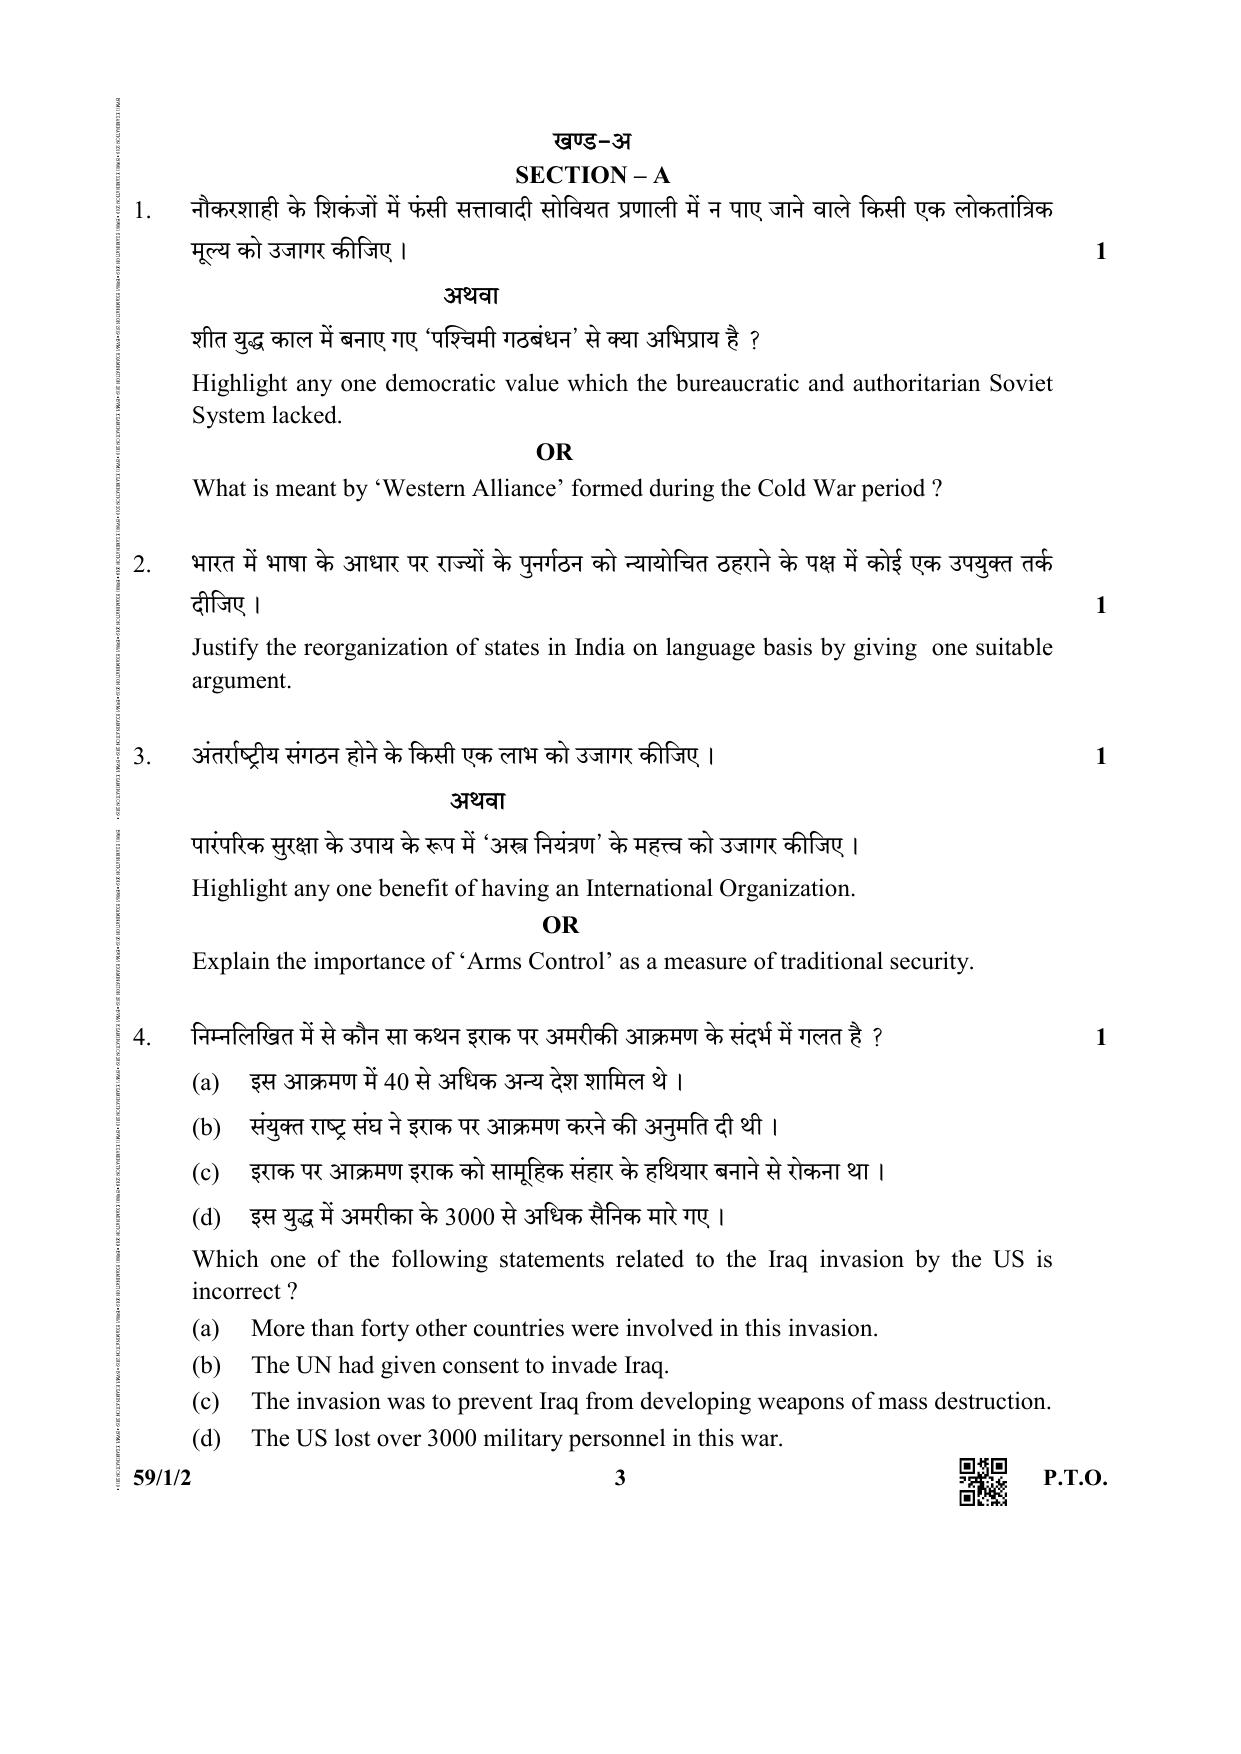 CBSE Class 12 59-1-2 (Political Science) 2019 Question Paper - Page 3